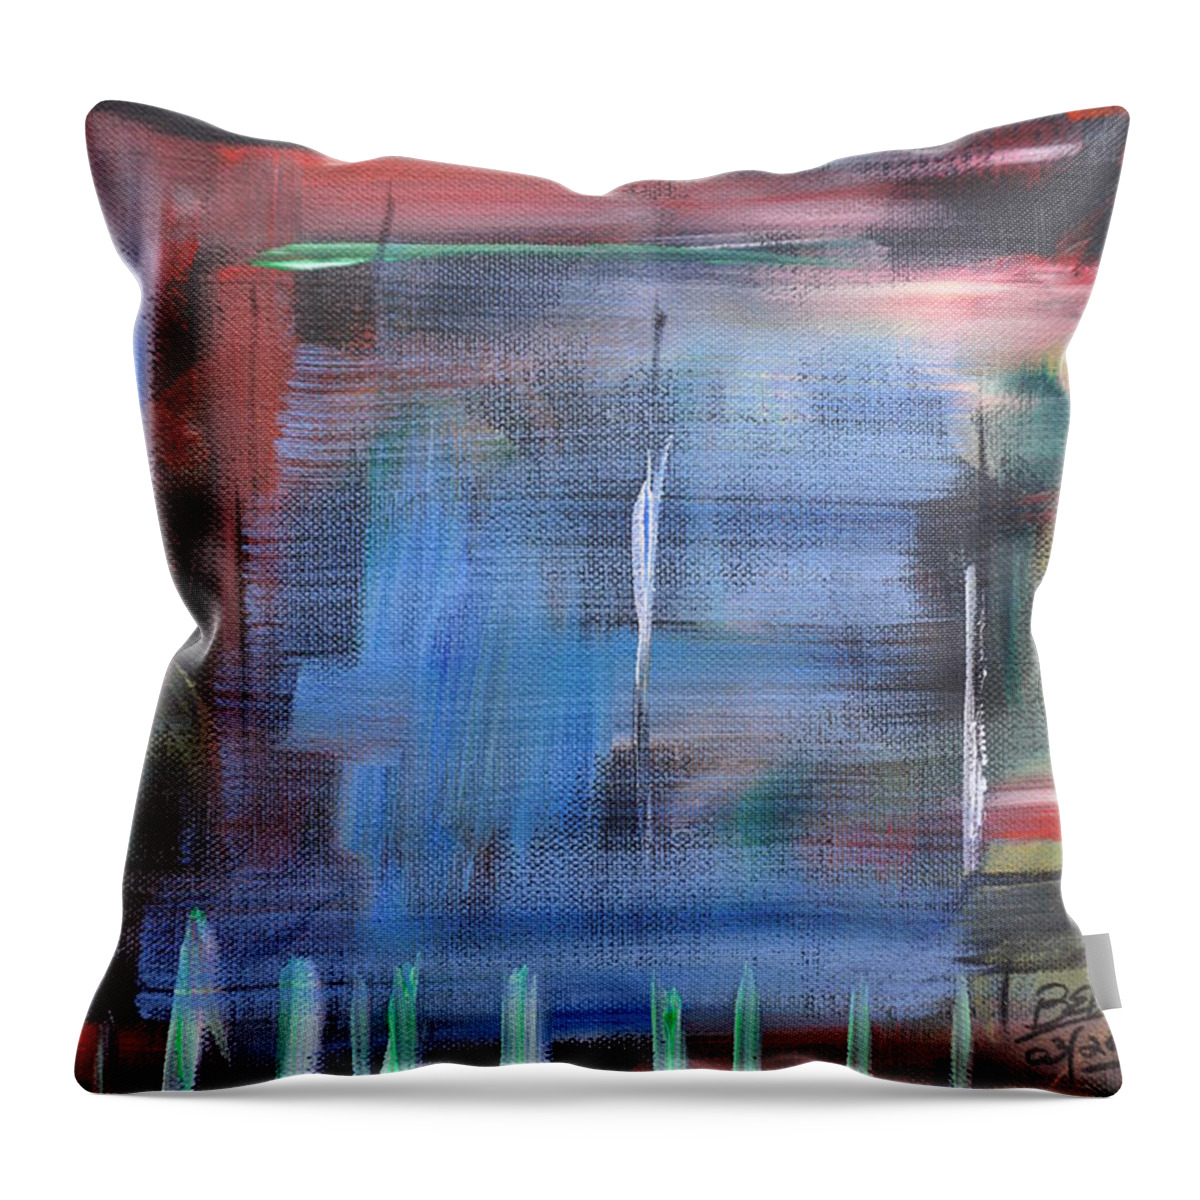 Bus Stop Throw Pillow featuring the painting Bus Stop Window by Brent Knippel